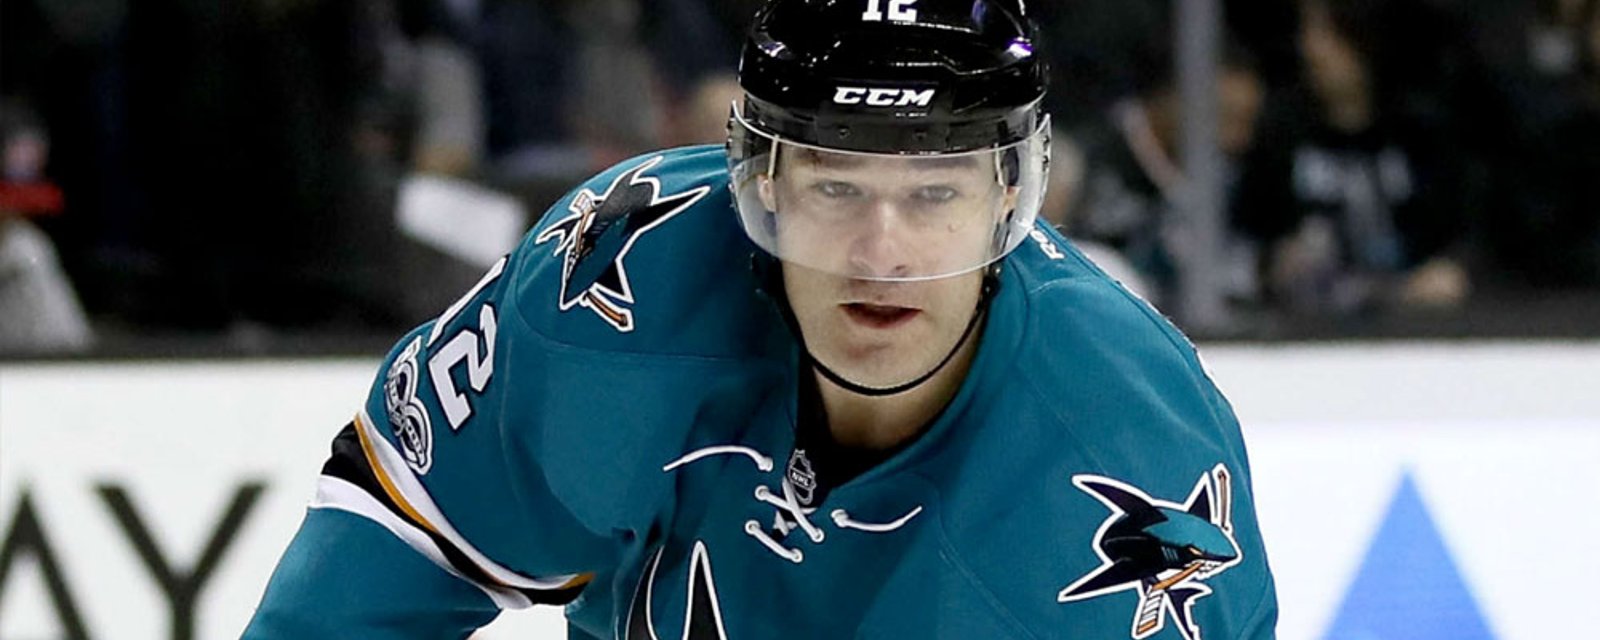 Report: Patrick Marleau will not sign with the Sharks